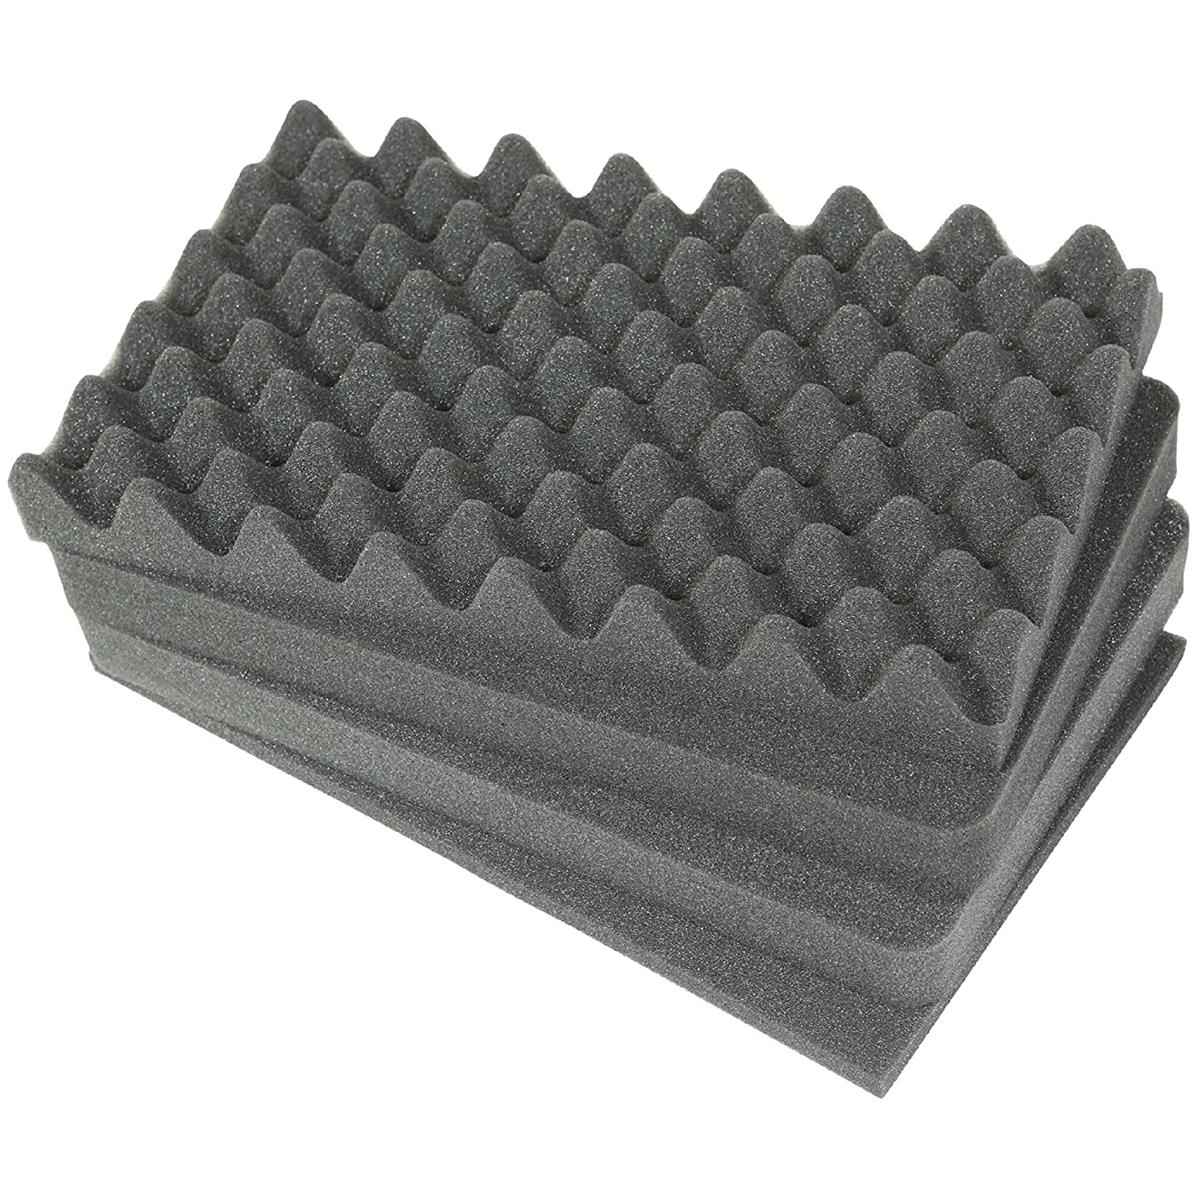 SKB Replacement Cubed Foam for 3i-1706-6